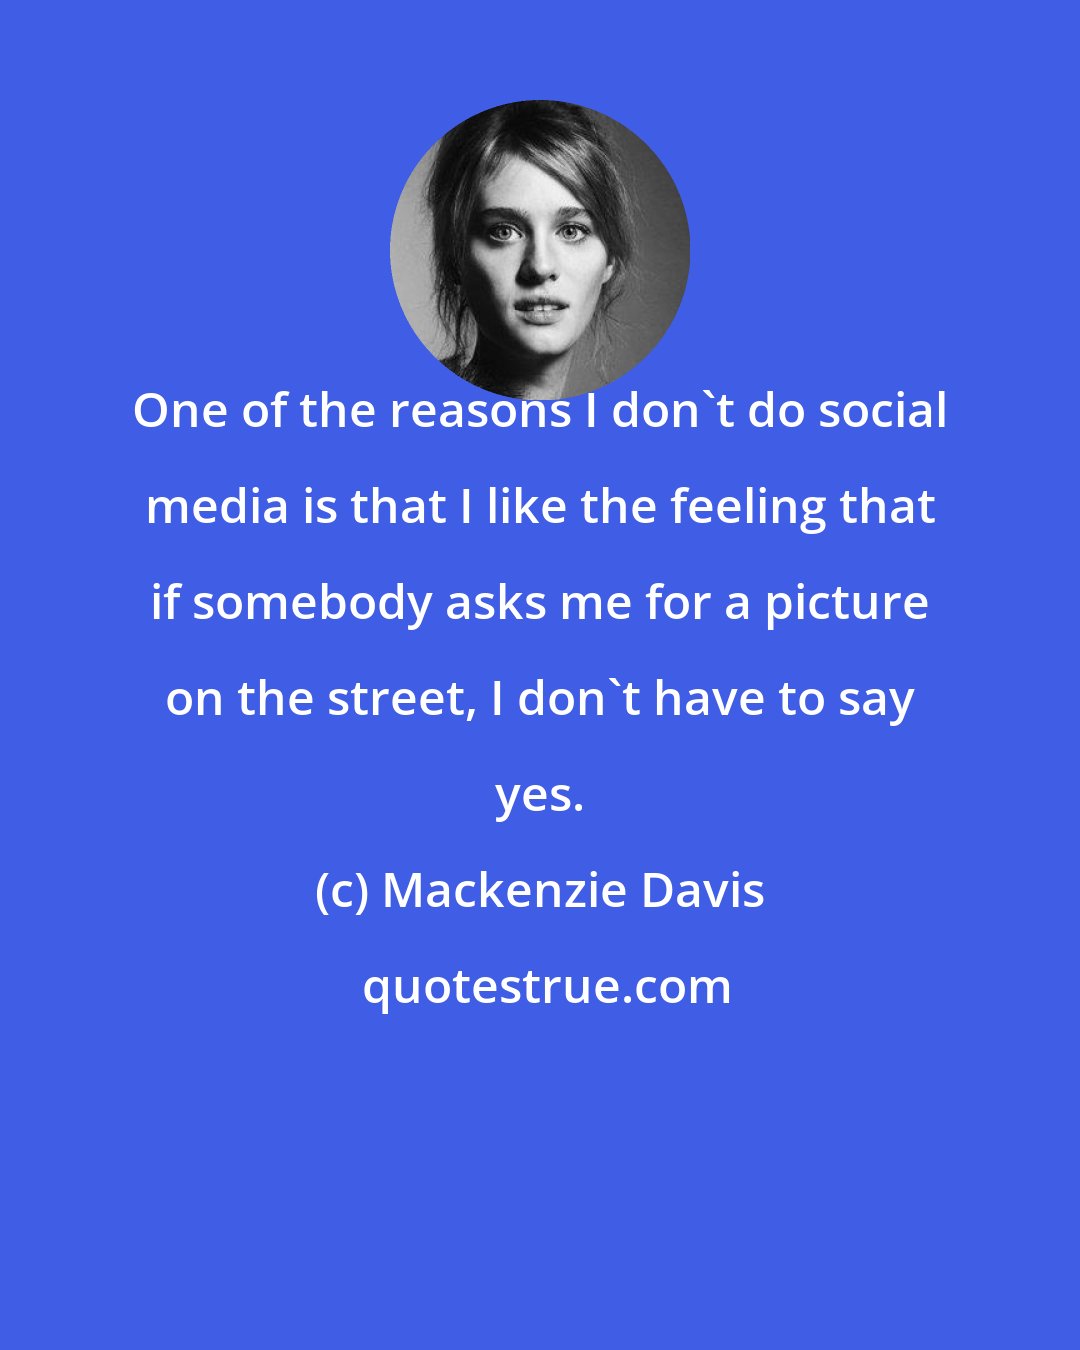 Mackenzie Davis: One of the reasons I don't do social media is that I like the feeling that if somebody asks me for a picture on the street, I don't have to say yes.